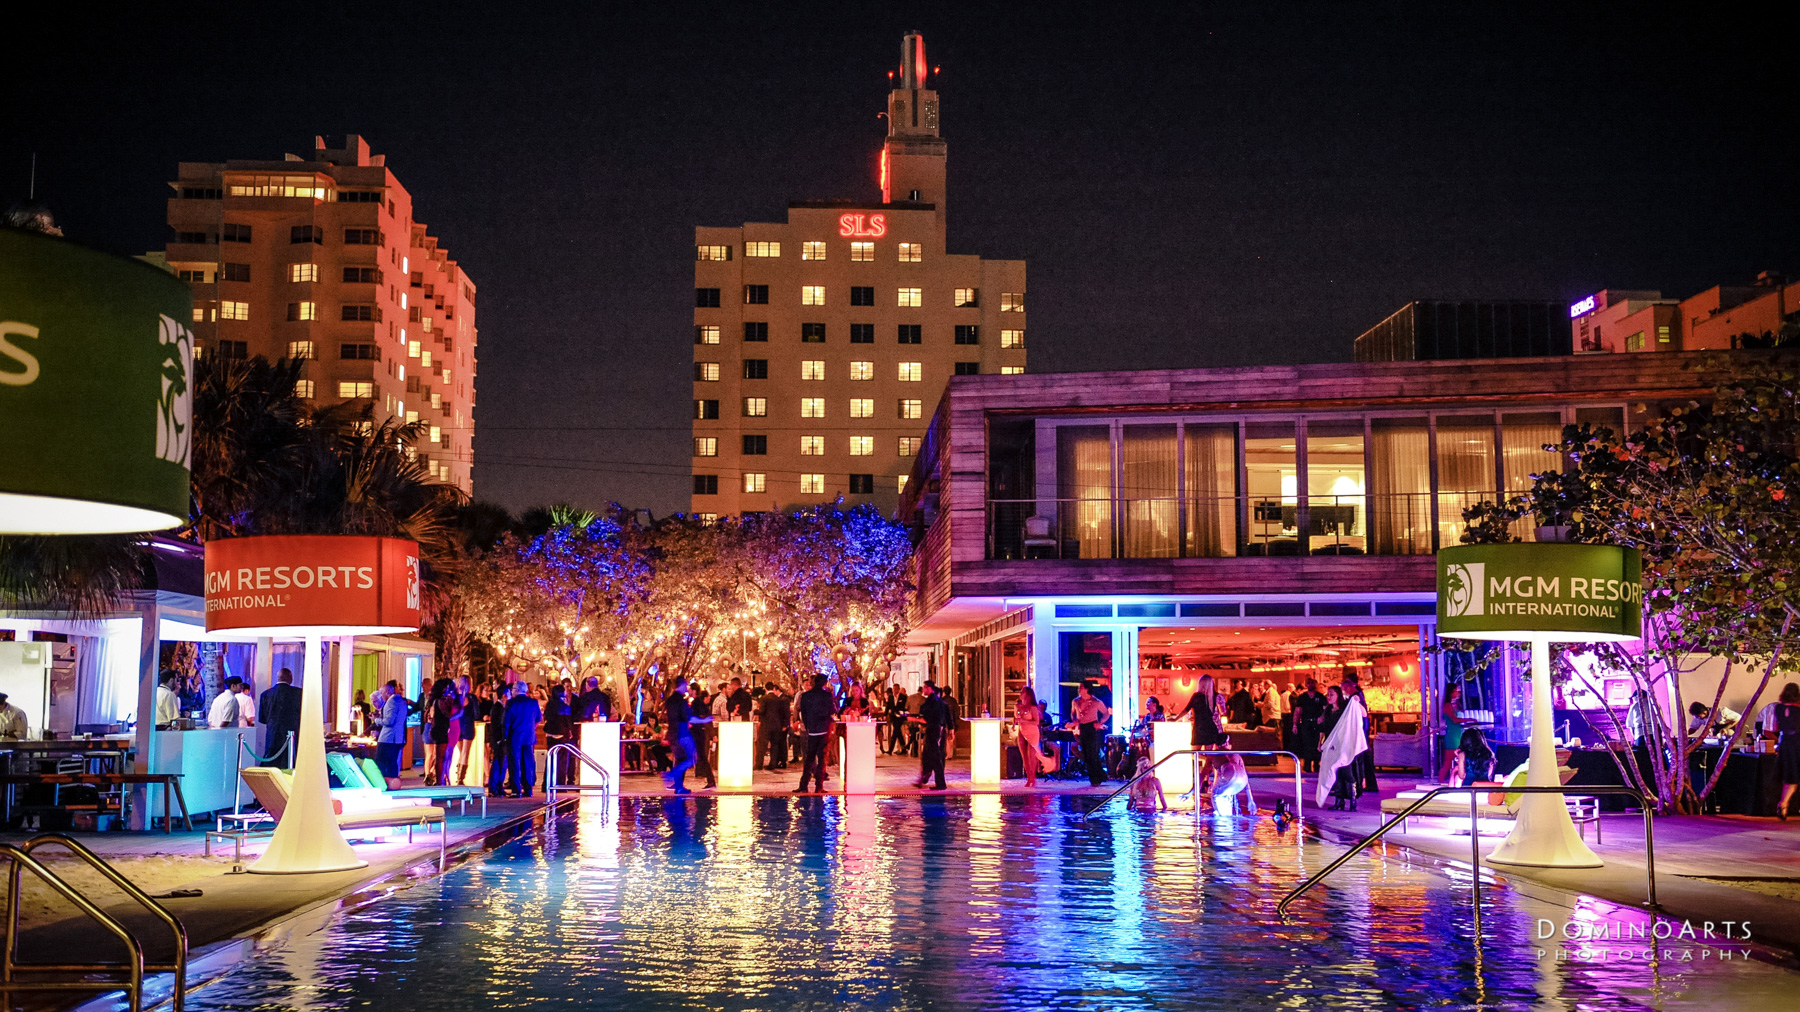 Pool side Corporate Event at SLS South Beach, Miami by Domino Arts Photography